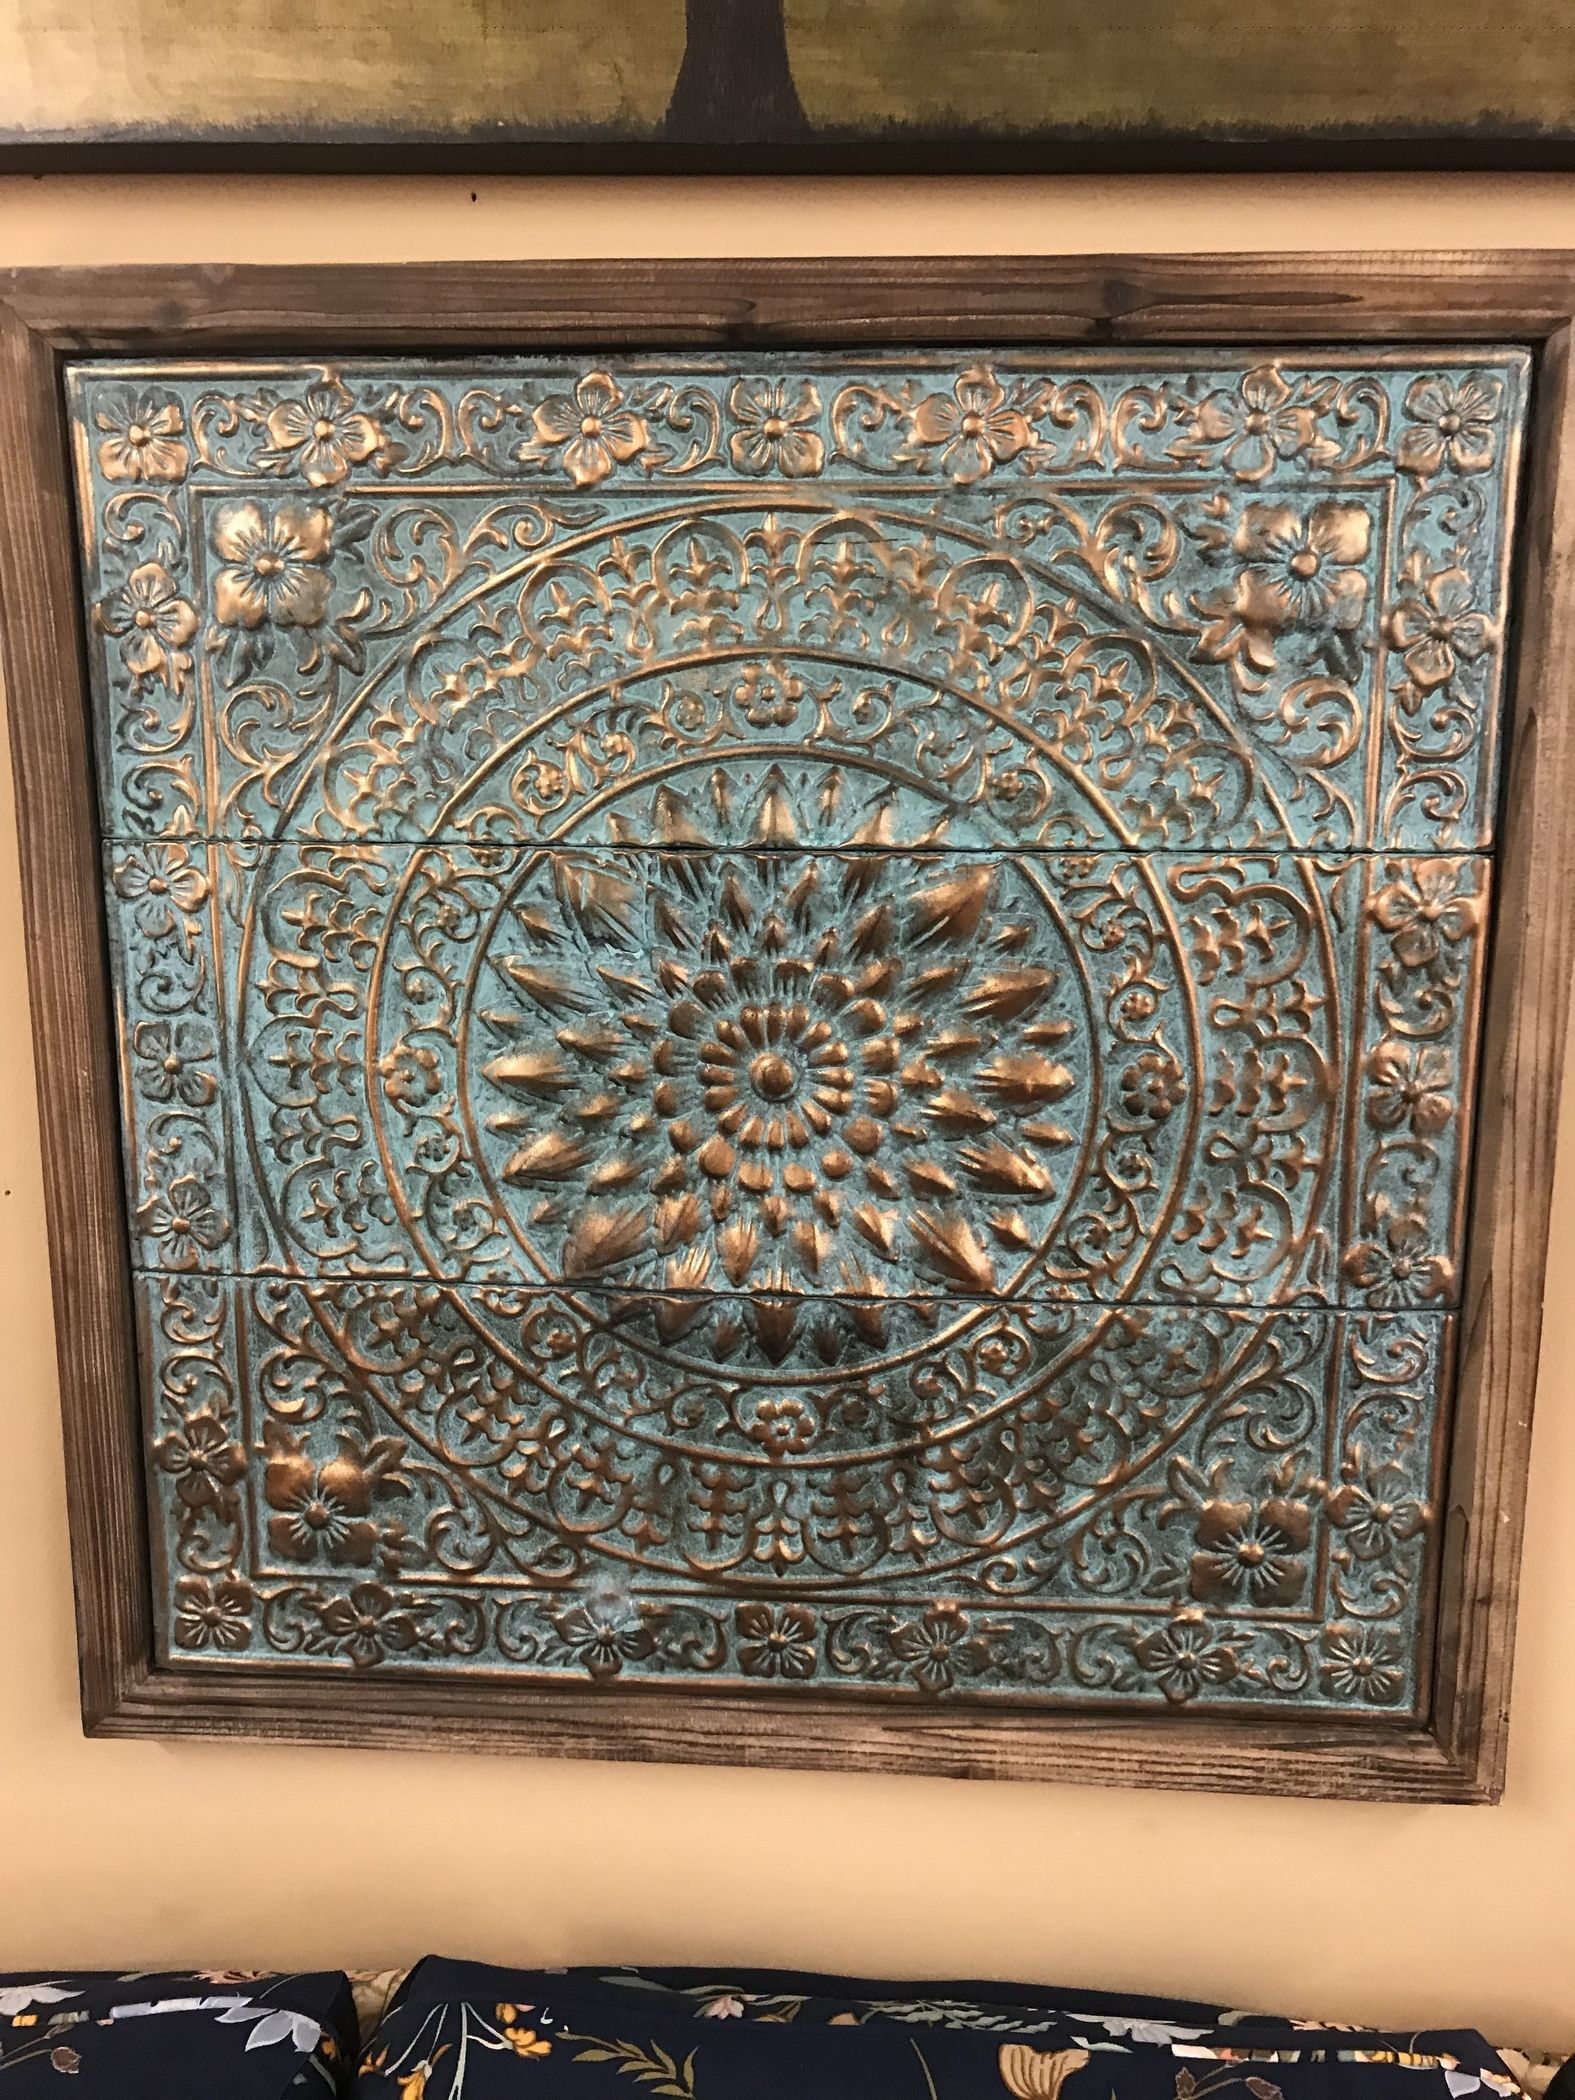 Stamped Metal Wall Decor | Delmarva Furniture Consignment In Newest Sparks Metal Wall Art (Gallery 19 of 20)